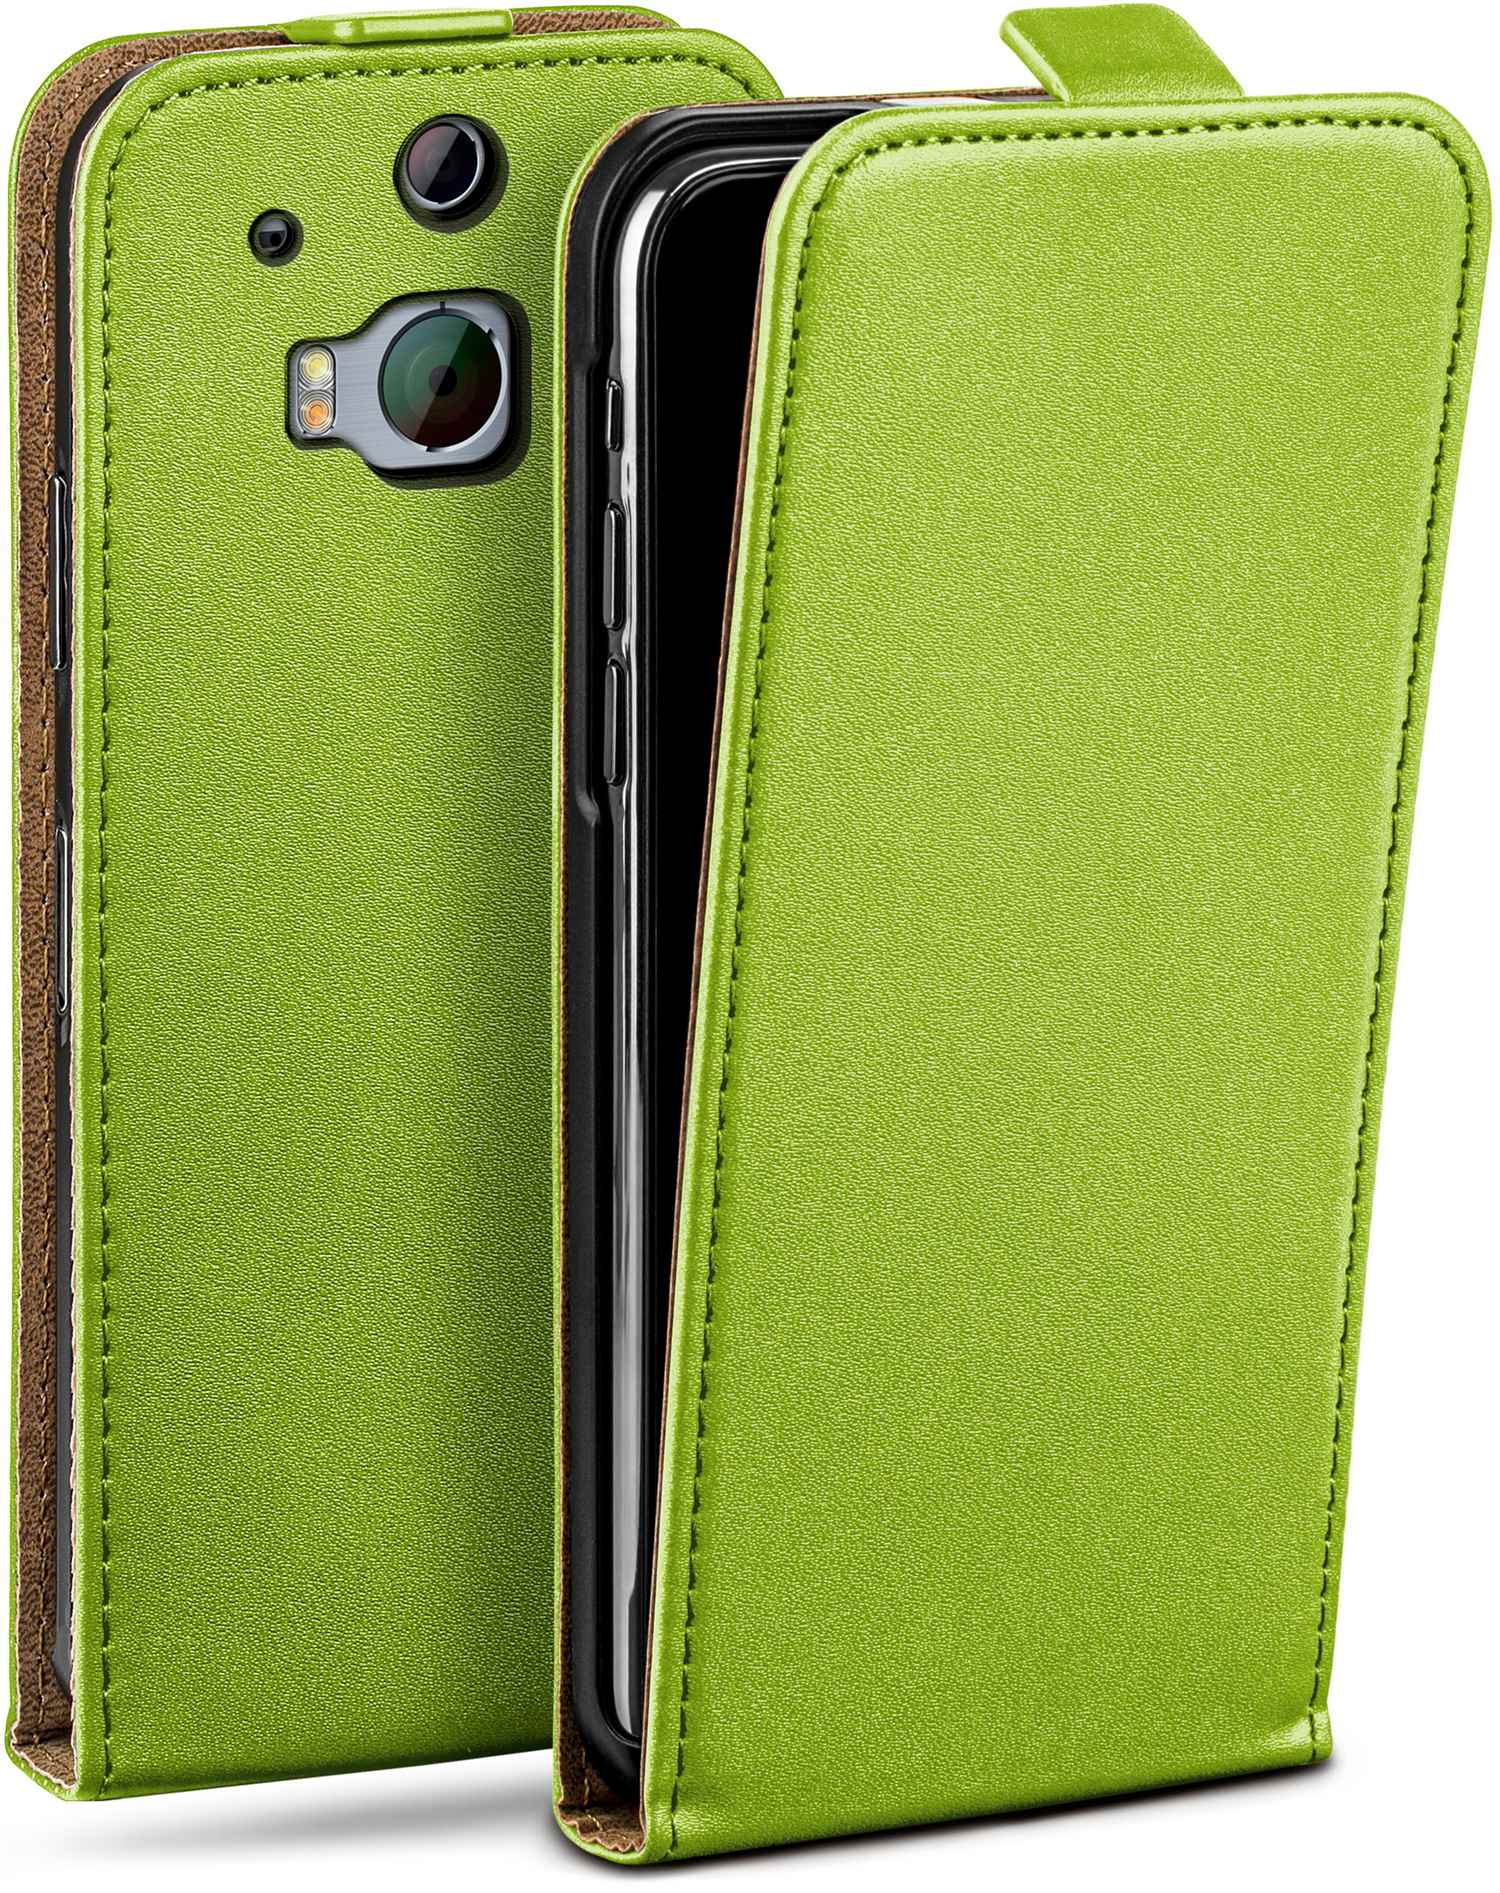 Case, Flip Cover, One M8, HTC, Flip MOEX Lime-Green